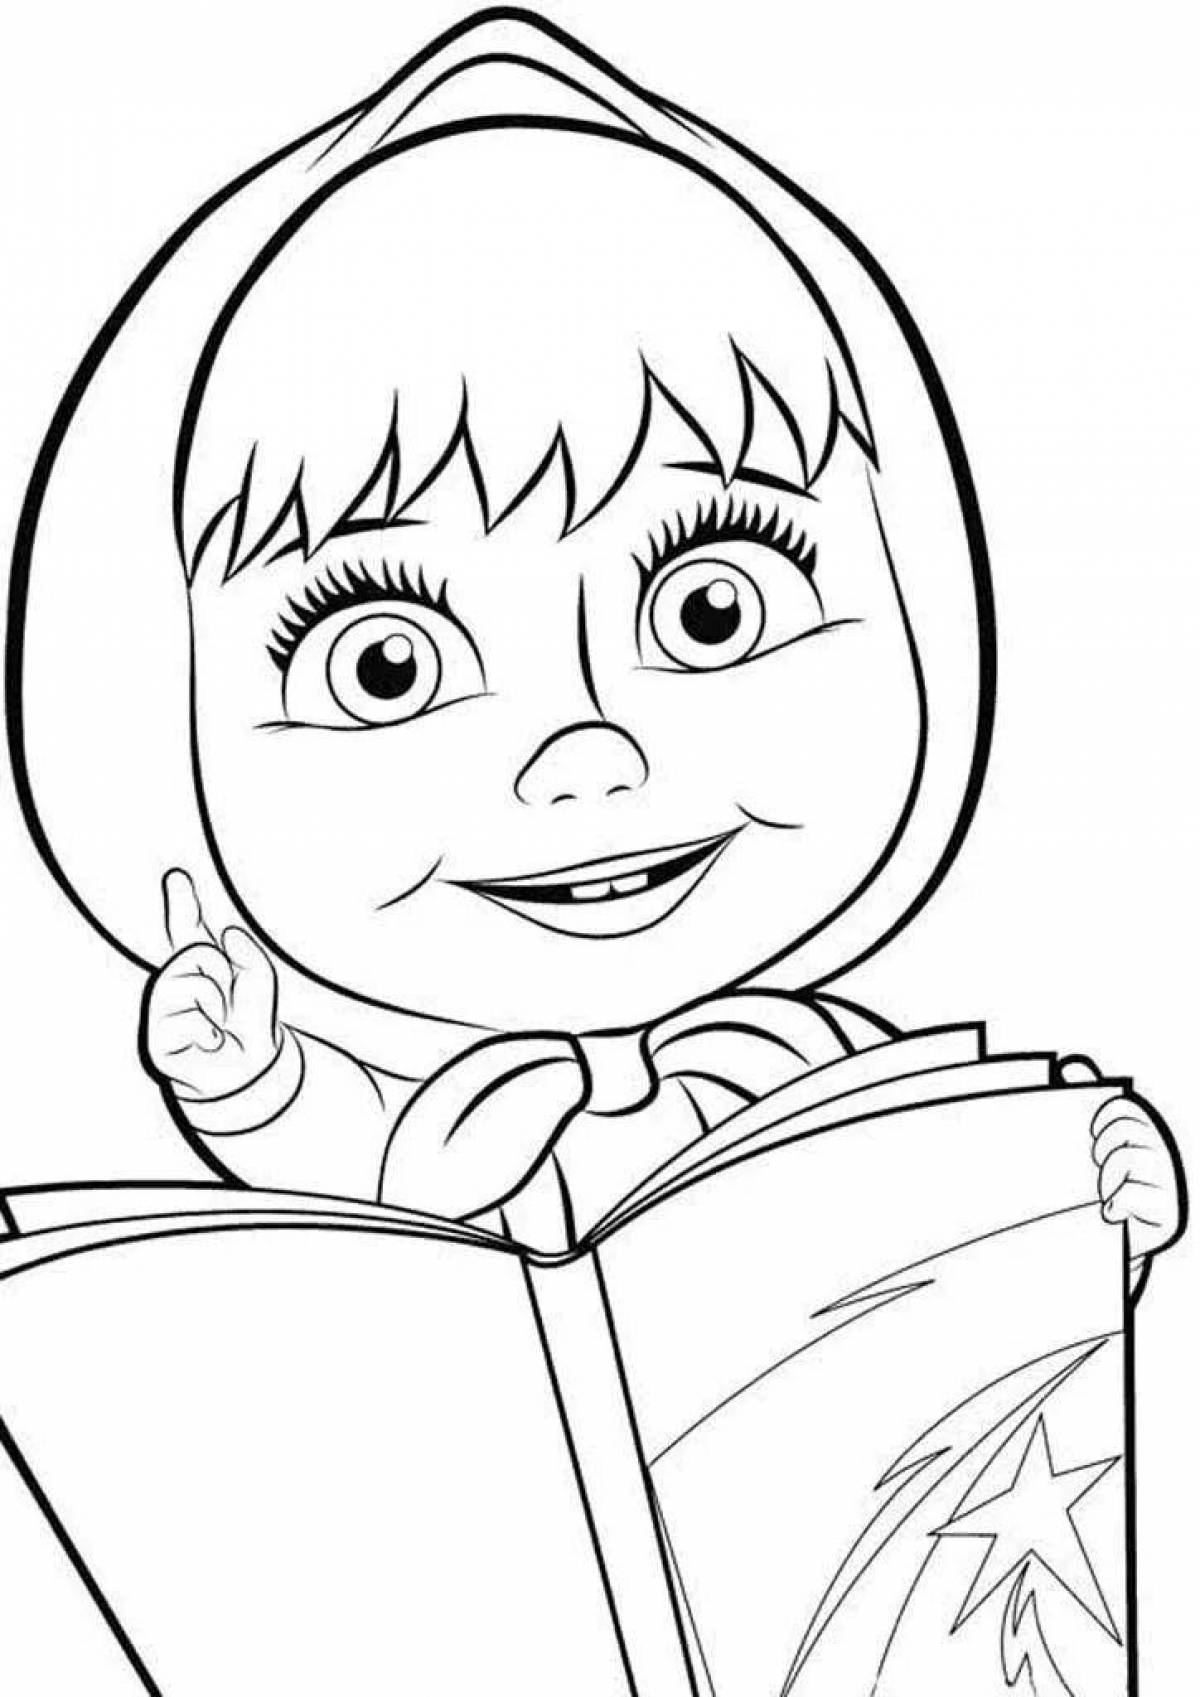 Attractive masha and the bear coloring book